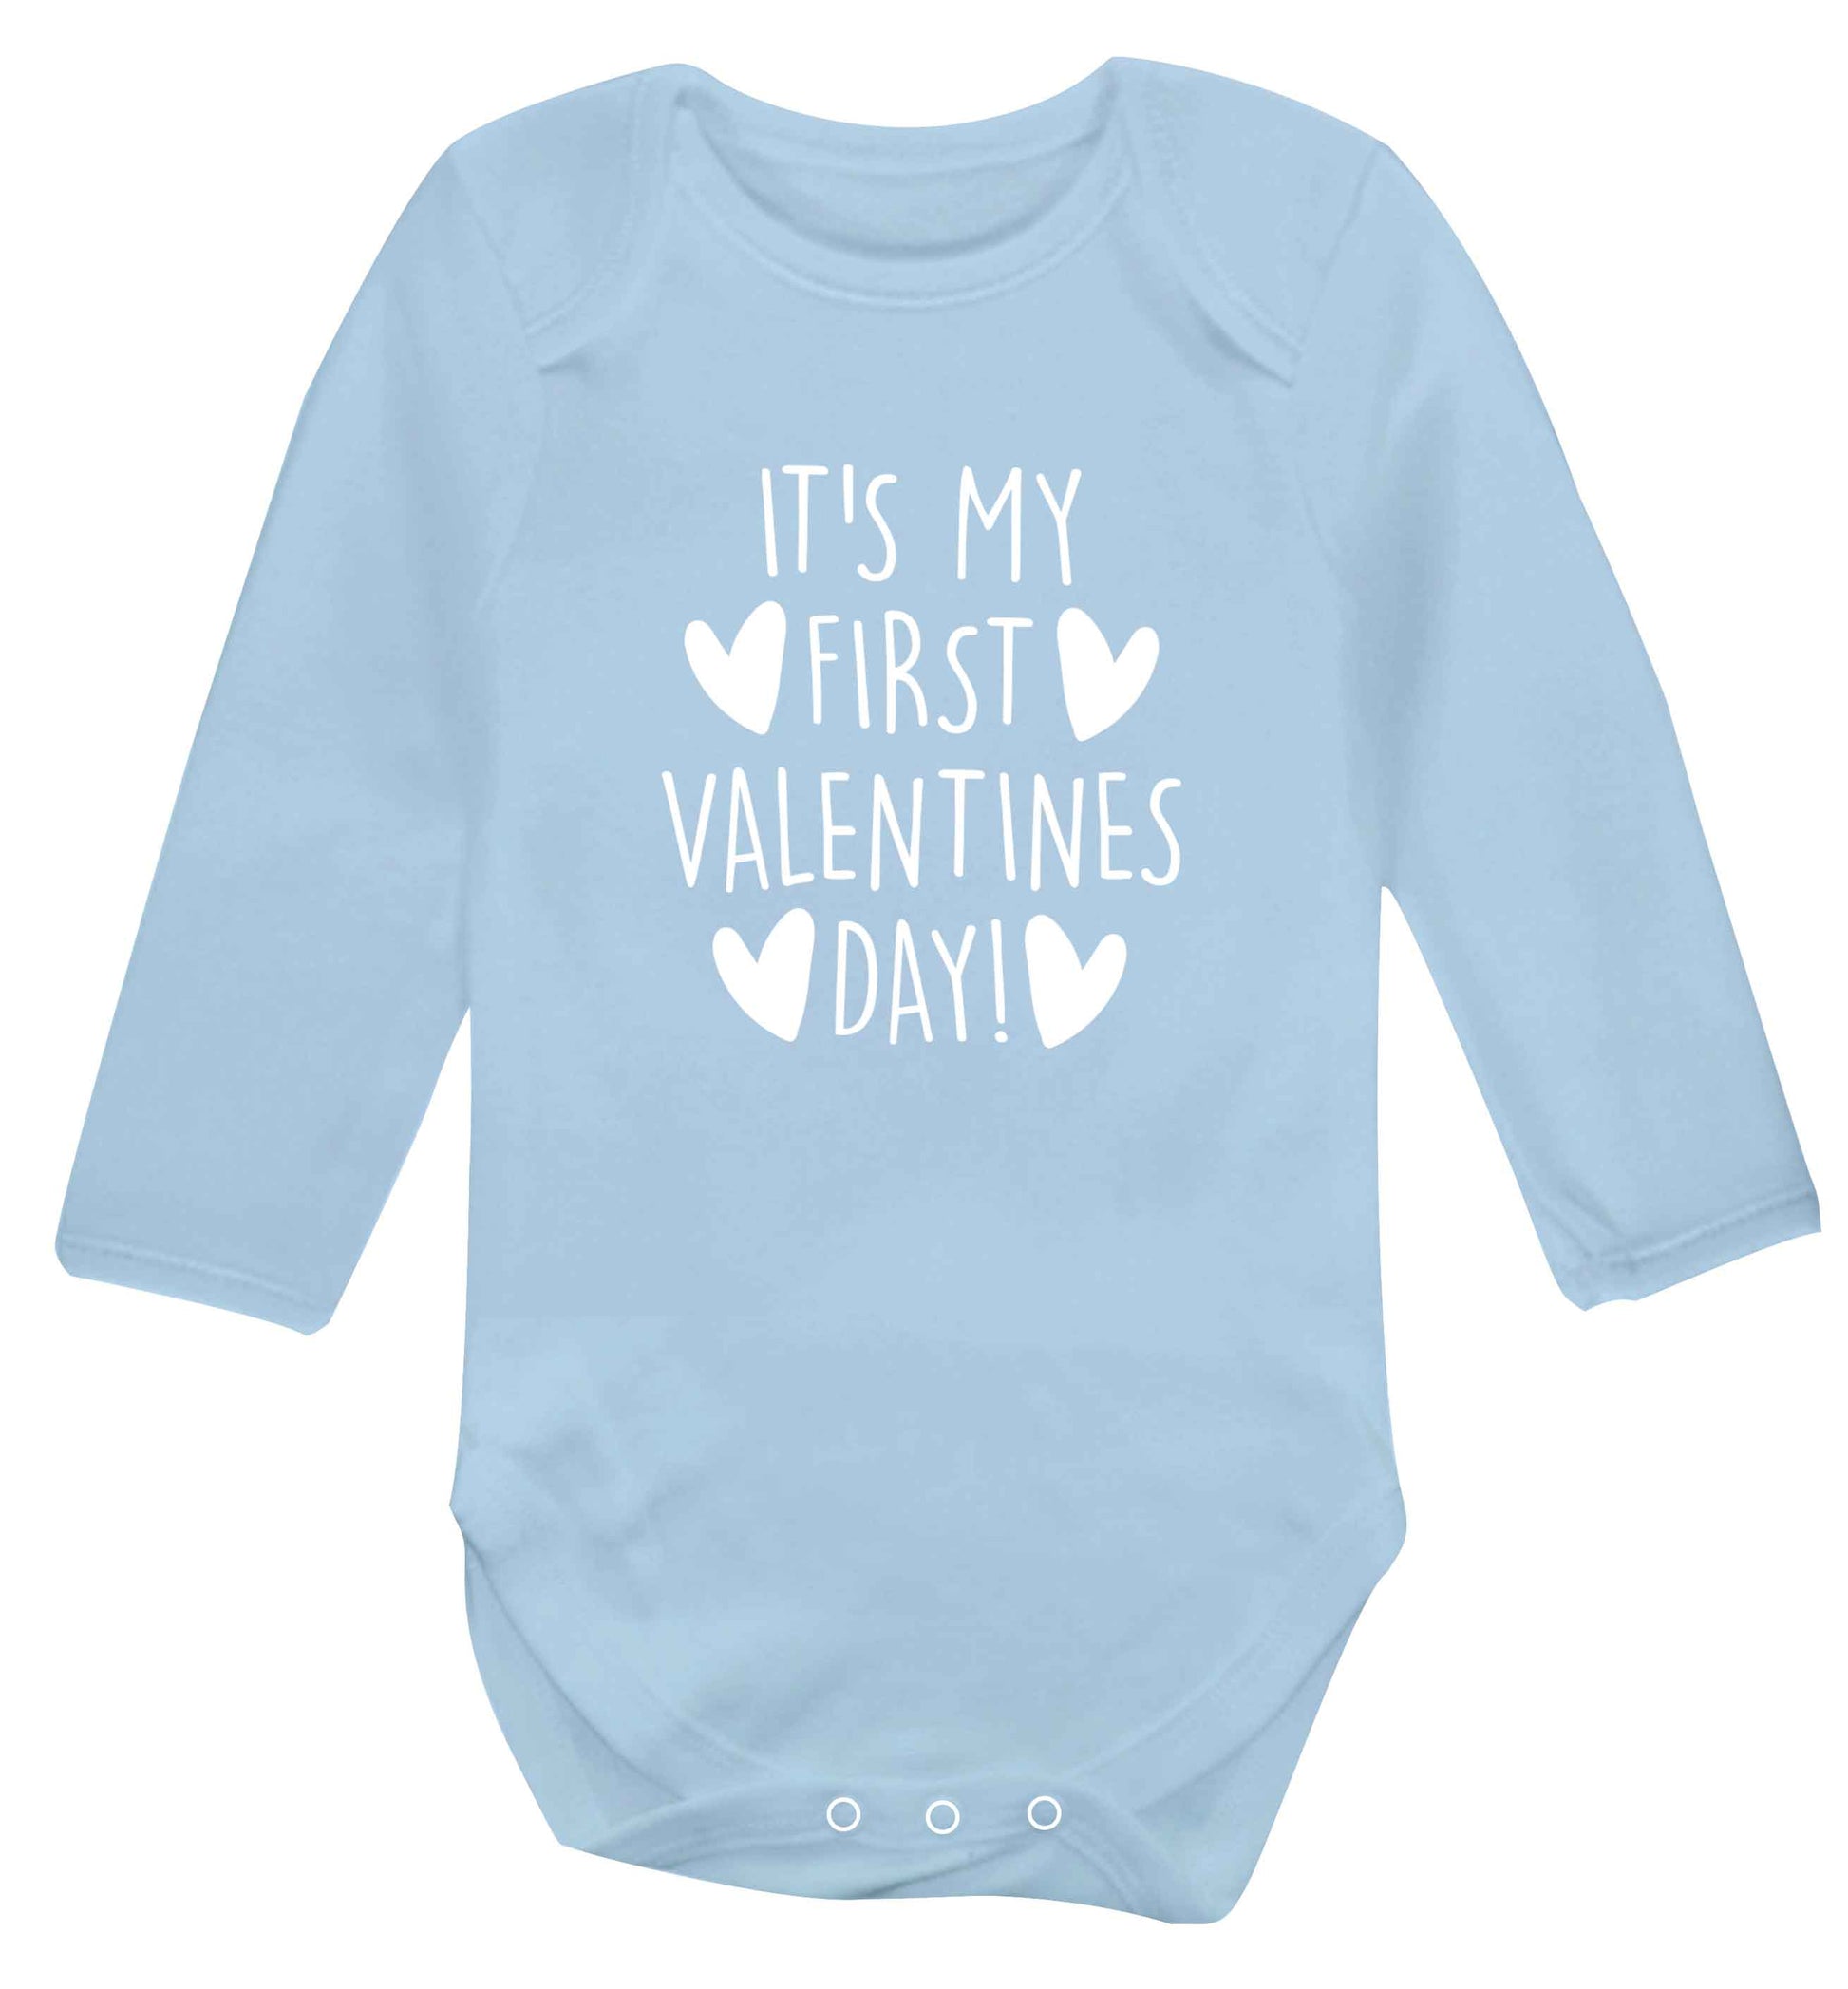 It's my first valentines day! baby vest long sleeved pale blue 6-12 months